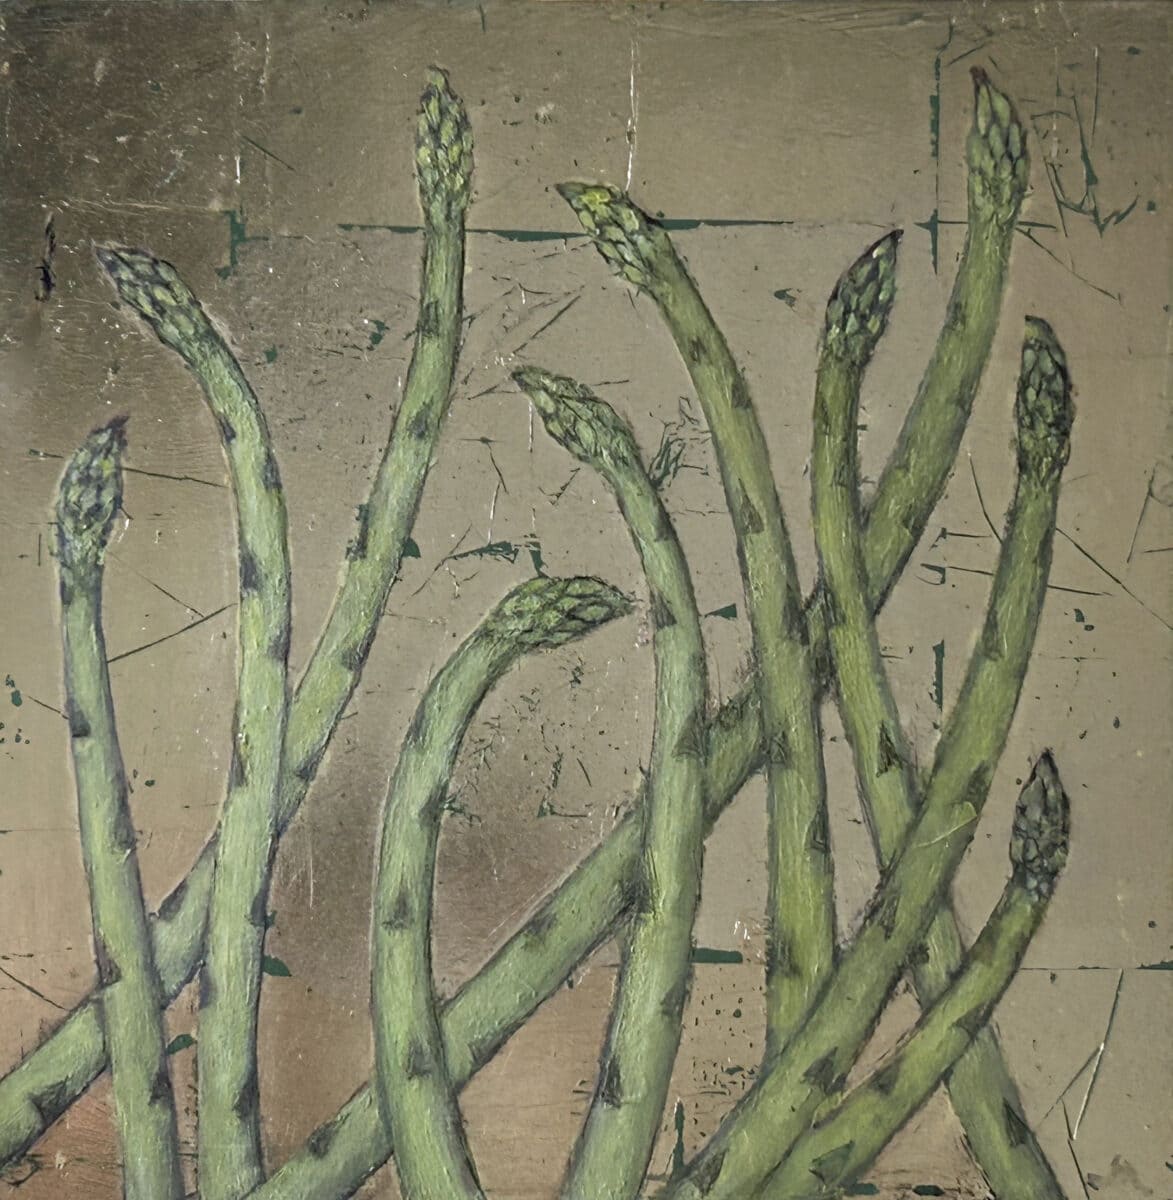 Gold Leaf with green undertones support the delicate asparagus as the spring up out of the ground.